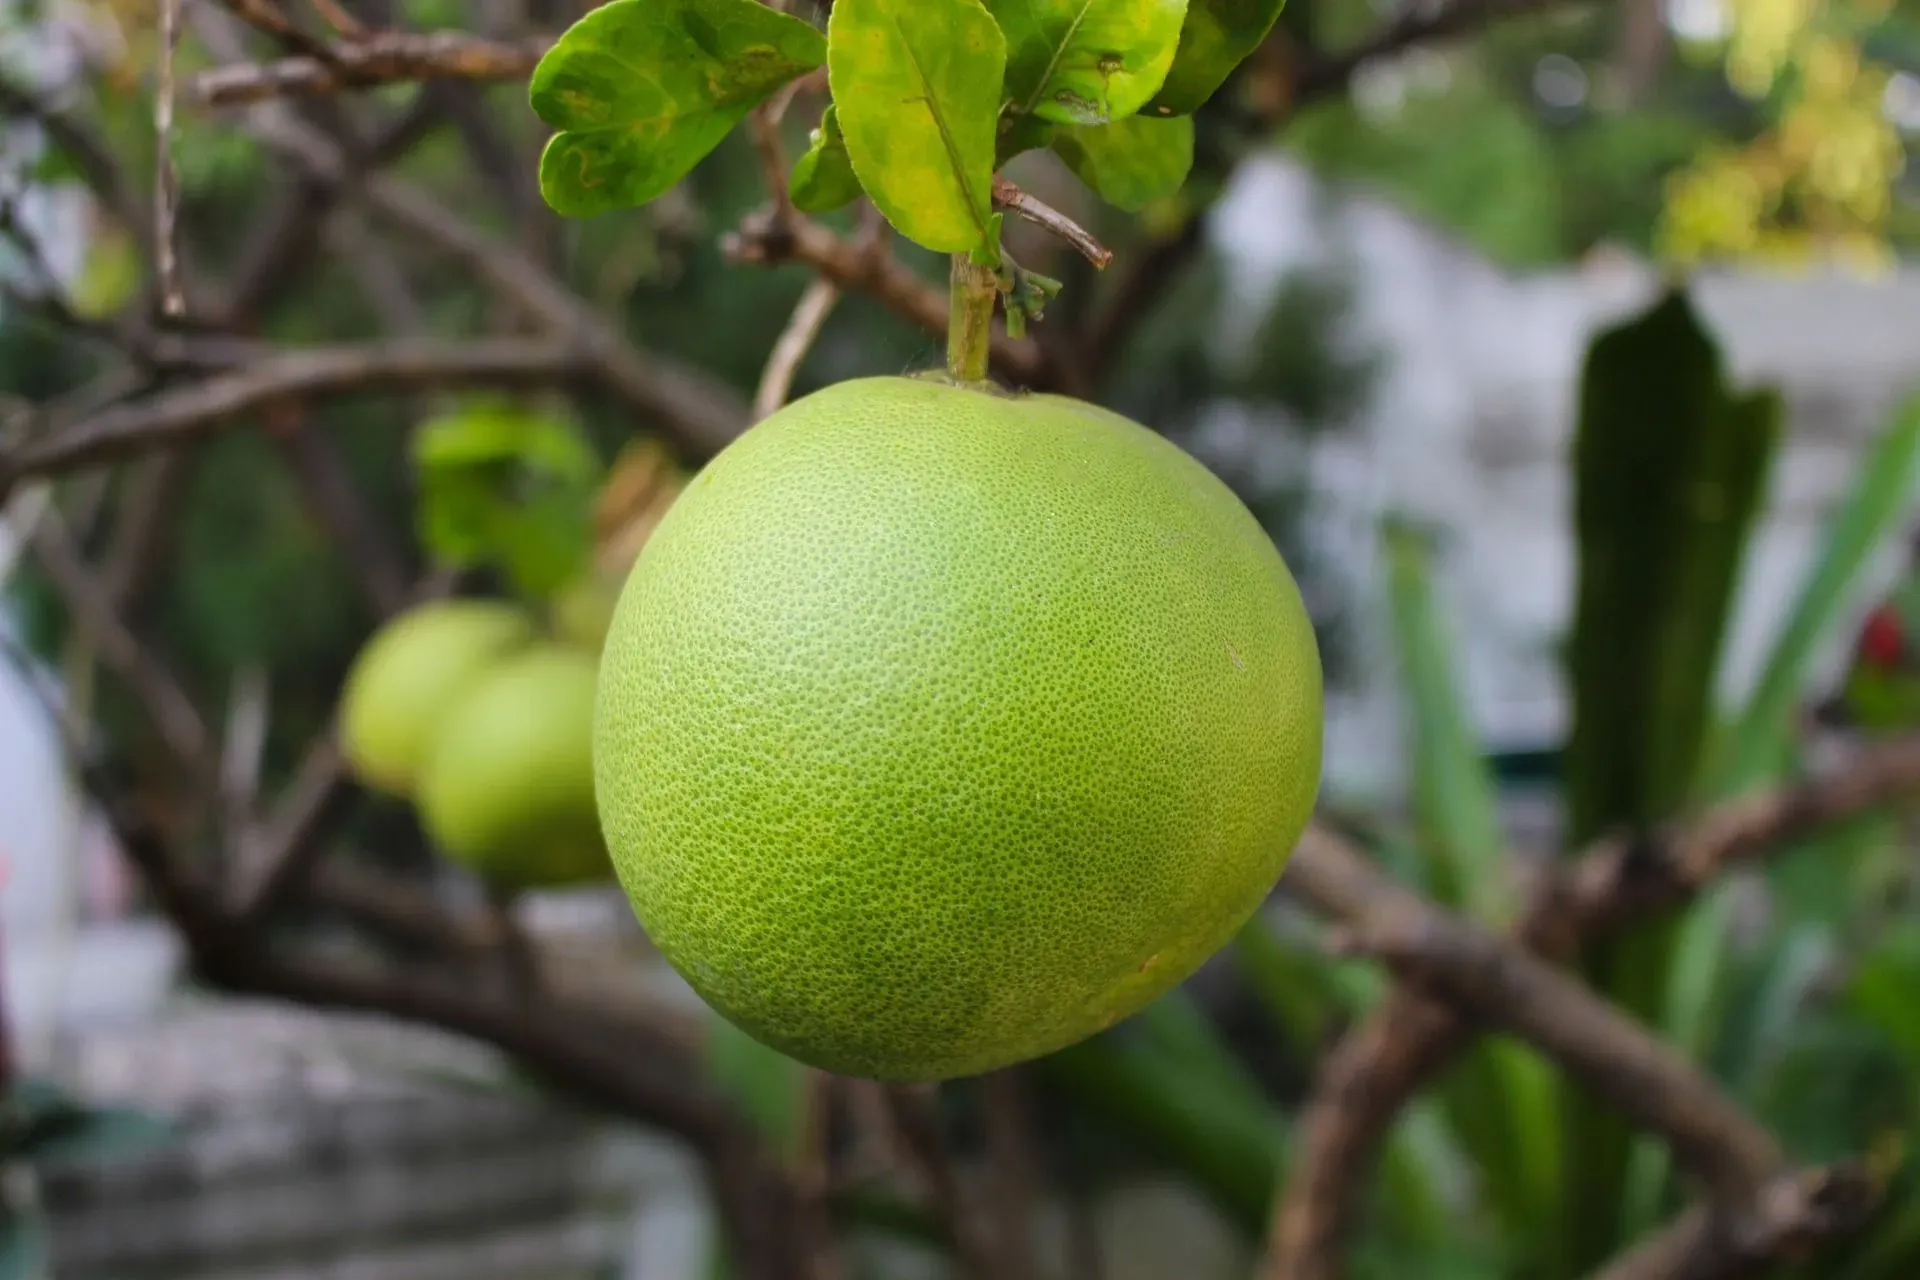 Pomelo has got the 'biggest citrus fruit' as its nickname. Discover more Pomelo nutrition facts here!